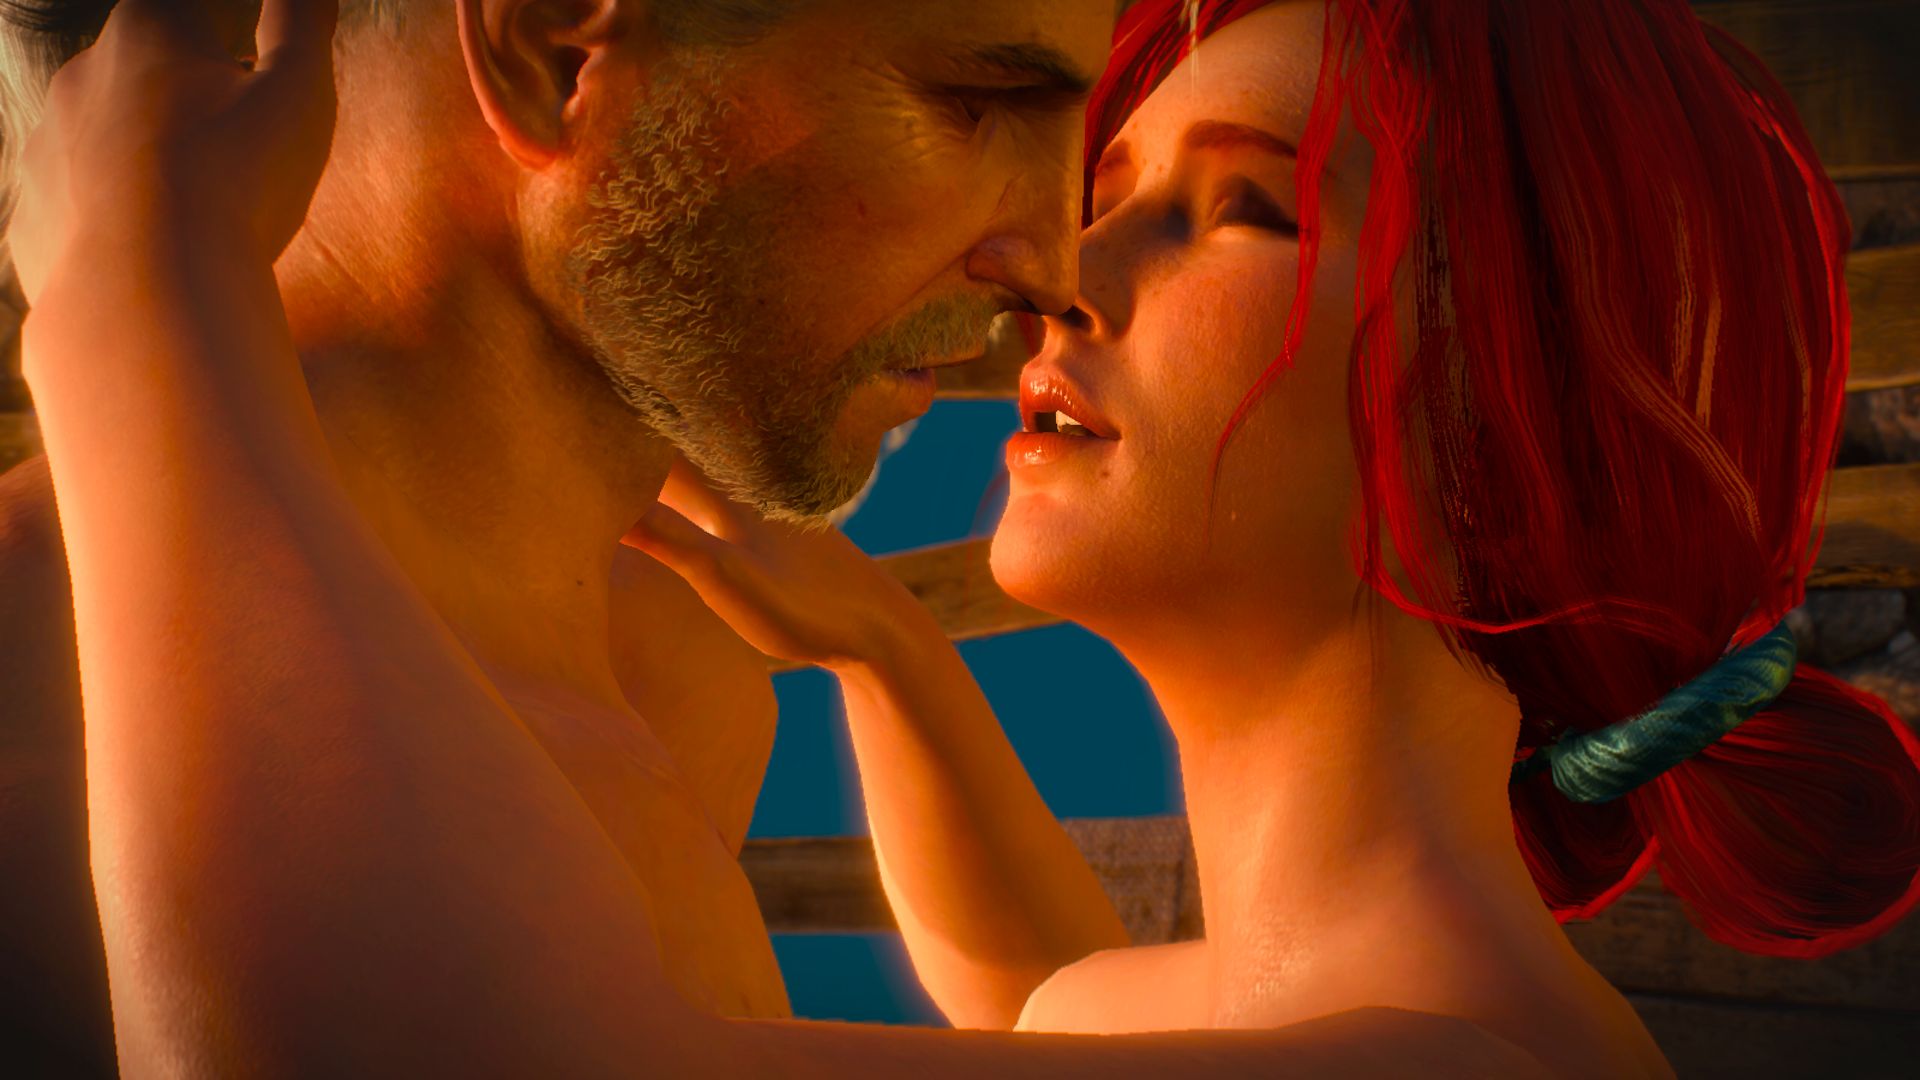 Game ending with threesome witcher